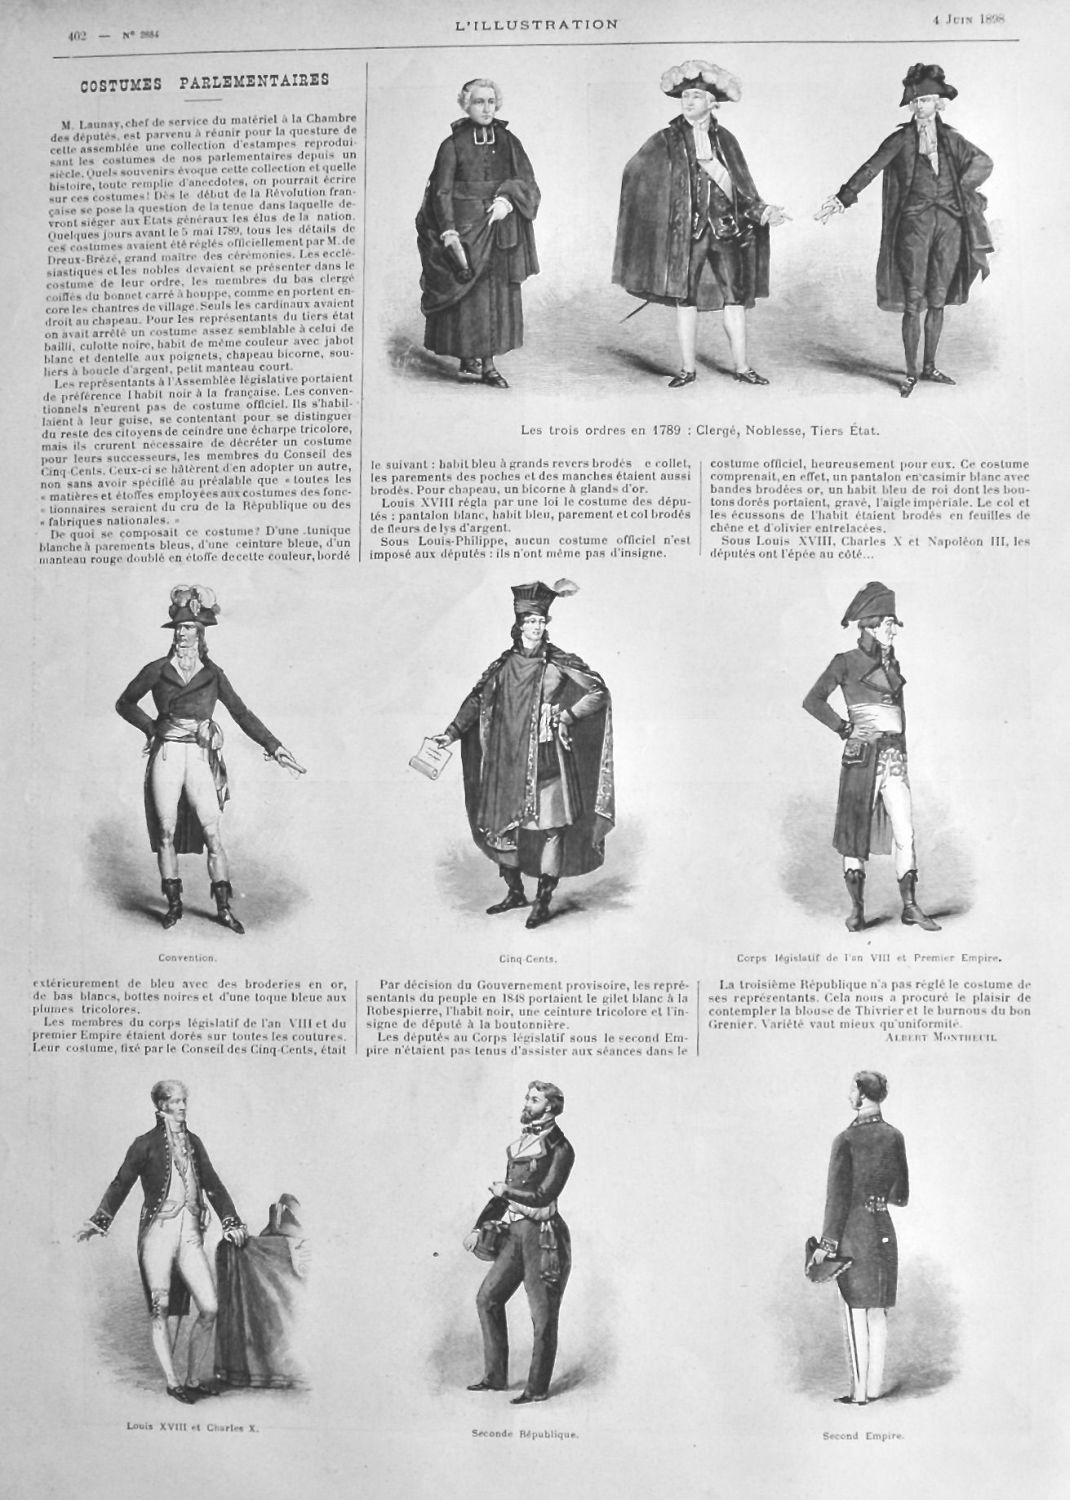 Costumes Parlementaires.  1898.